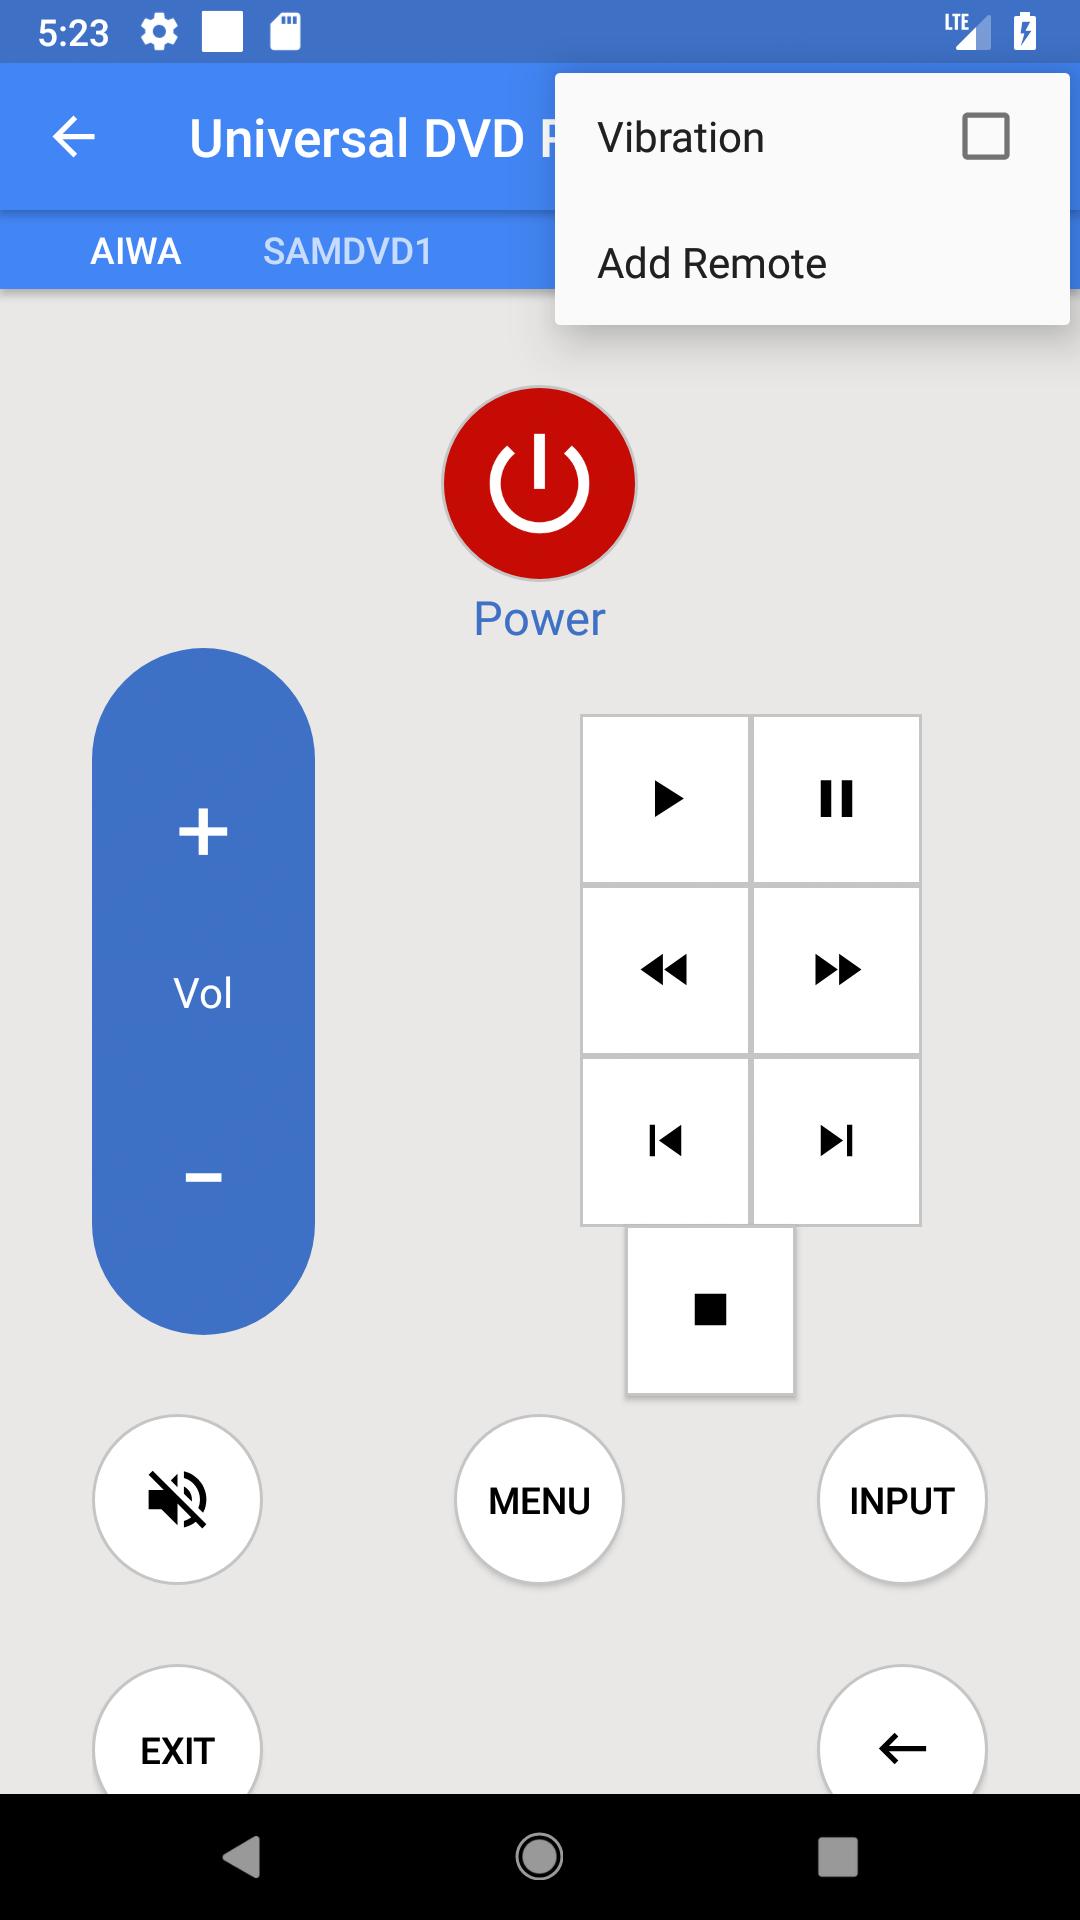 Universal DVD Remote Control for Android - APK Download